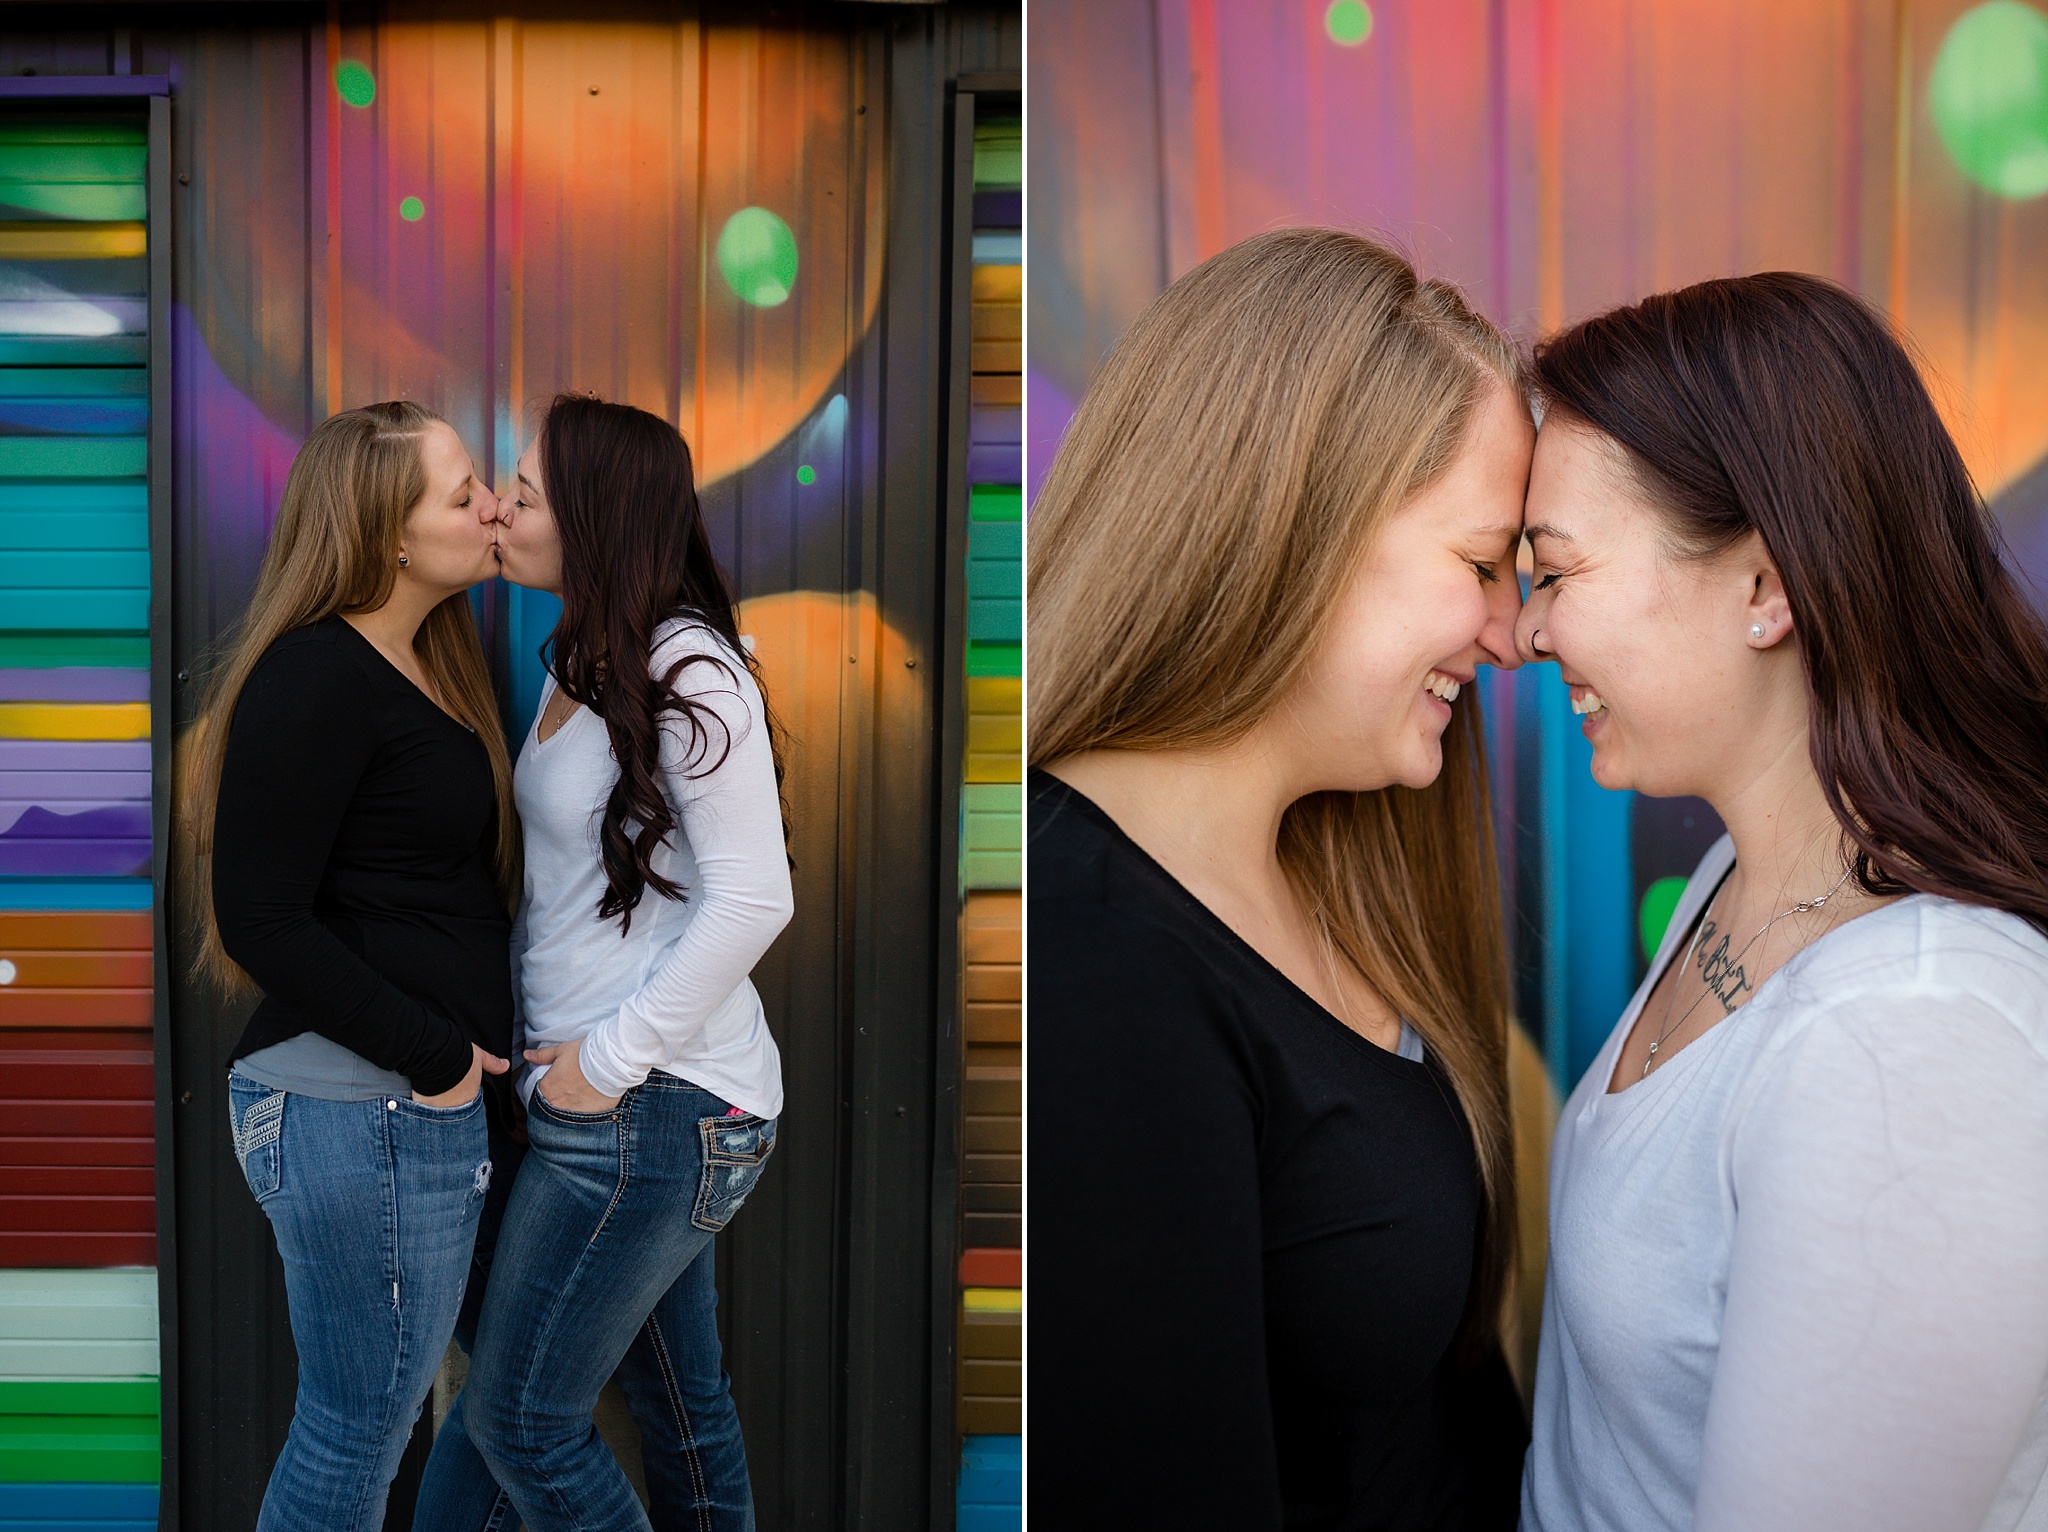 Couple standing in front of a colorful mural. Jessica & Caity’s Same-Sex Engagement Session at 10 Barrel Brewery & RiNo District by Colorado Engagement Photographer, Jennifer Garza. 10 Barrel Brewery Engagement, Brewery Engagement Photos, RiNo District Engagement Photos, RiNo District, RiNo Engagement Photography, Denver Engagement Photography, Denver Engagement, Colorado Engagement Photography, Urban Engagement Photos, Same-Sex Engagement Photography, Same-Sex Engagement Photos, Same-Sex Marriage, Love is Love, LGBTQ